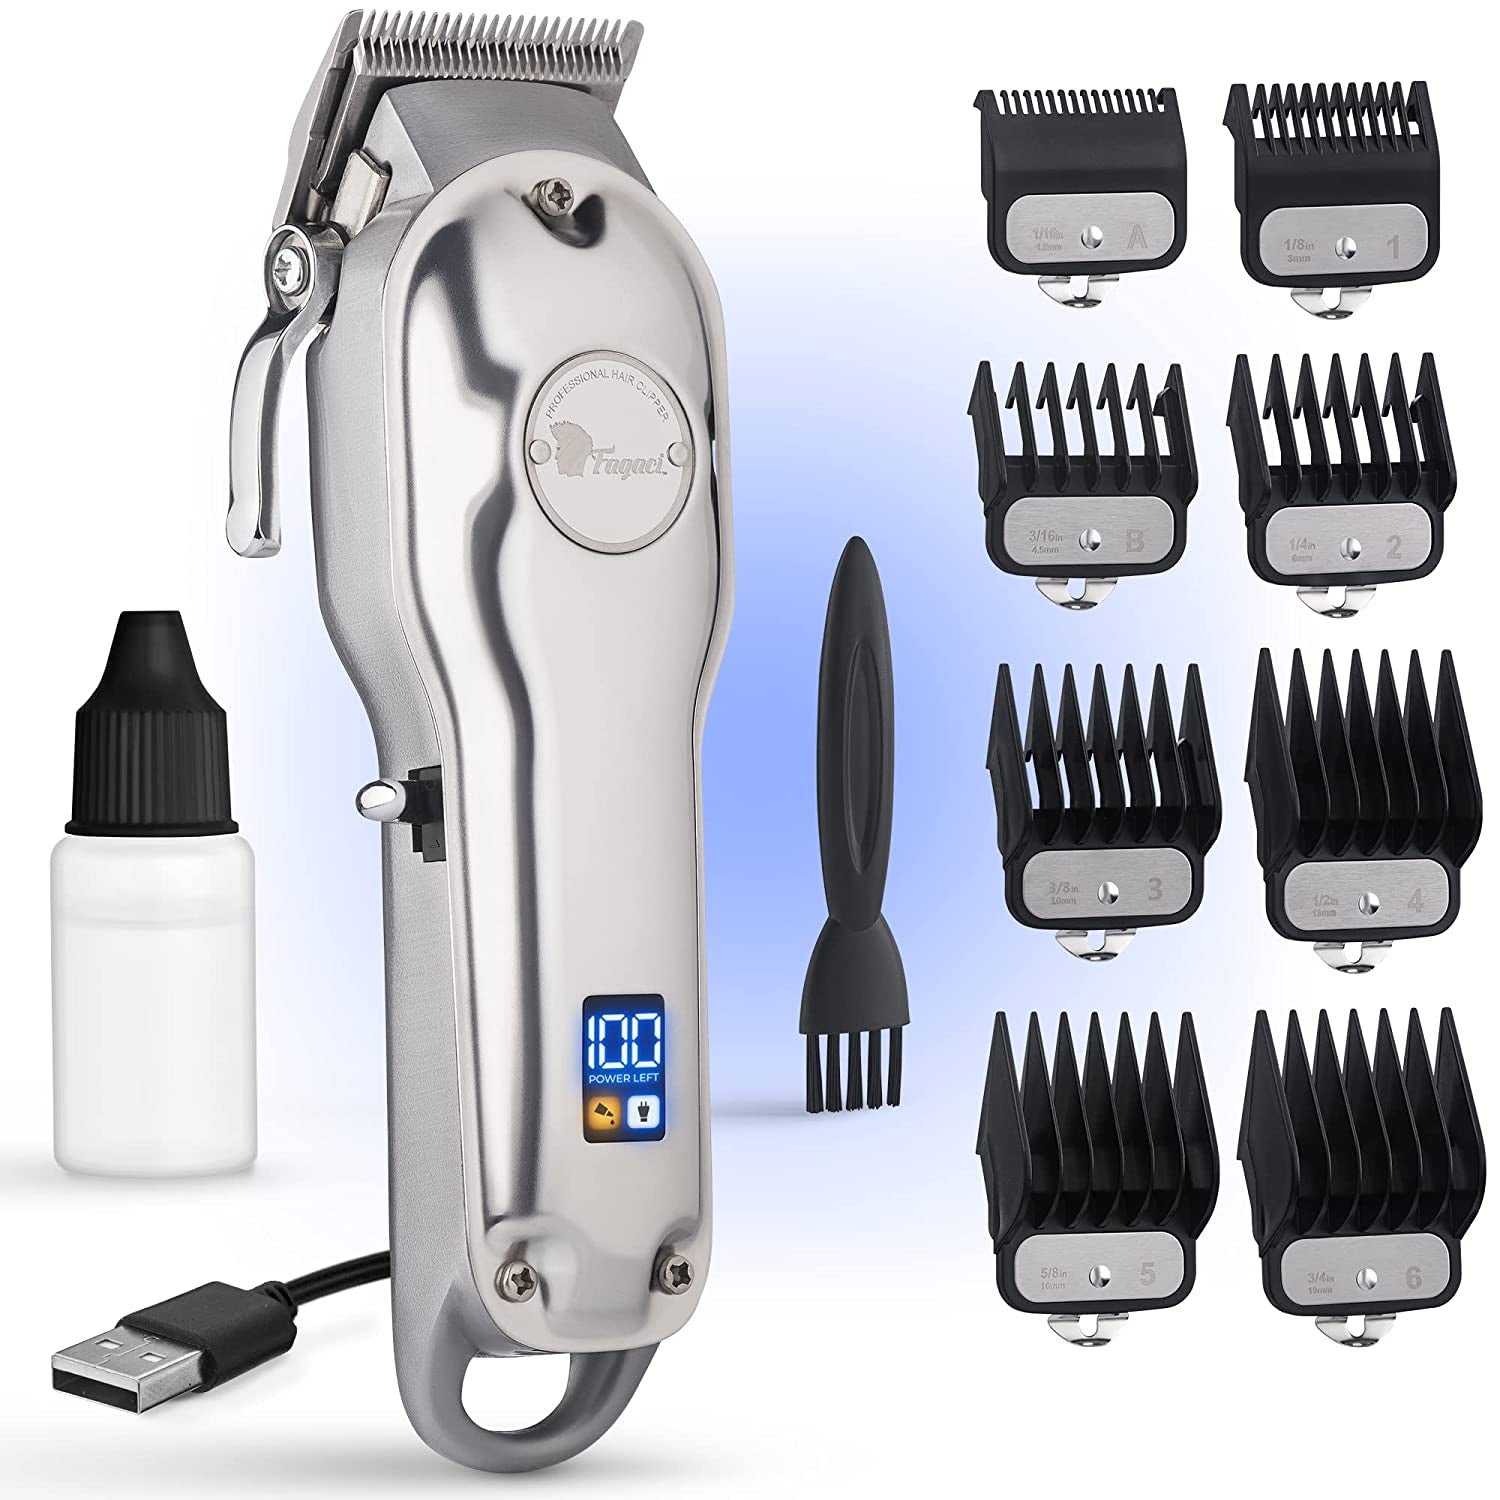 Professional Hair Clippers with Extremely Fine Cutting - Everyday-Sales.com